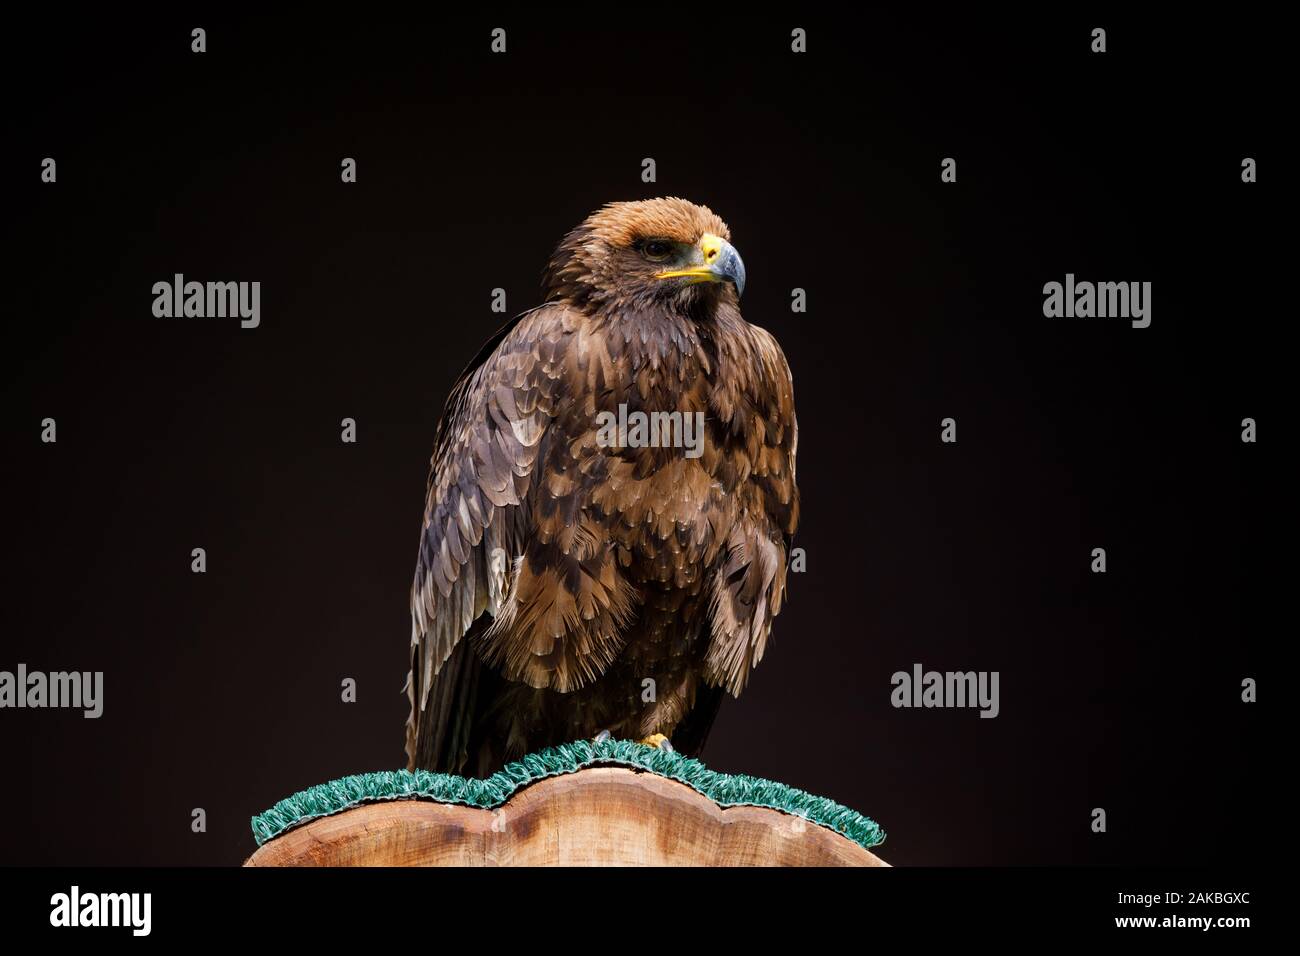 Steppe Eagle, a large bird of prey with rich brown plumage, sitting on a perch with dark background Stock Photo